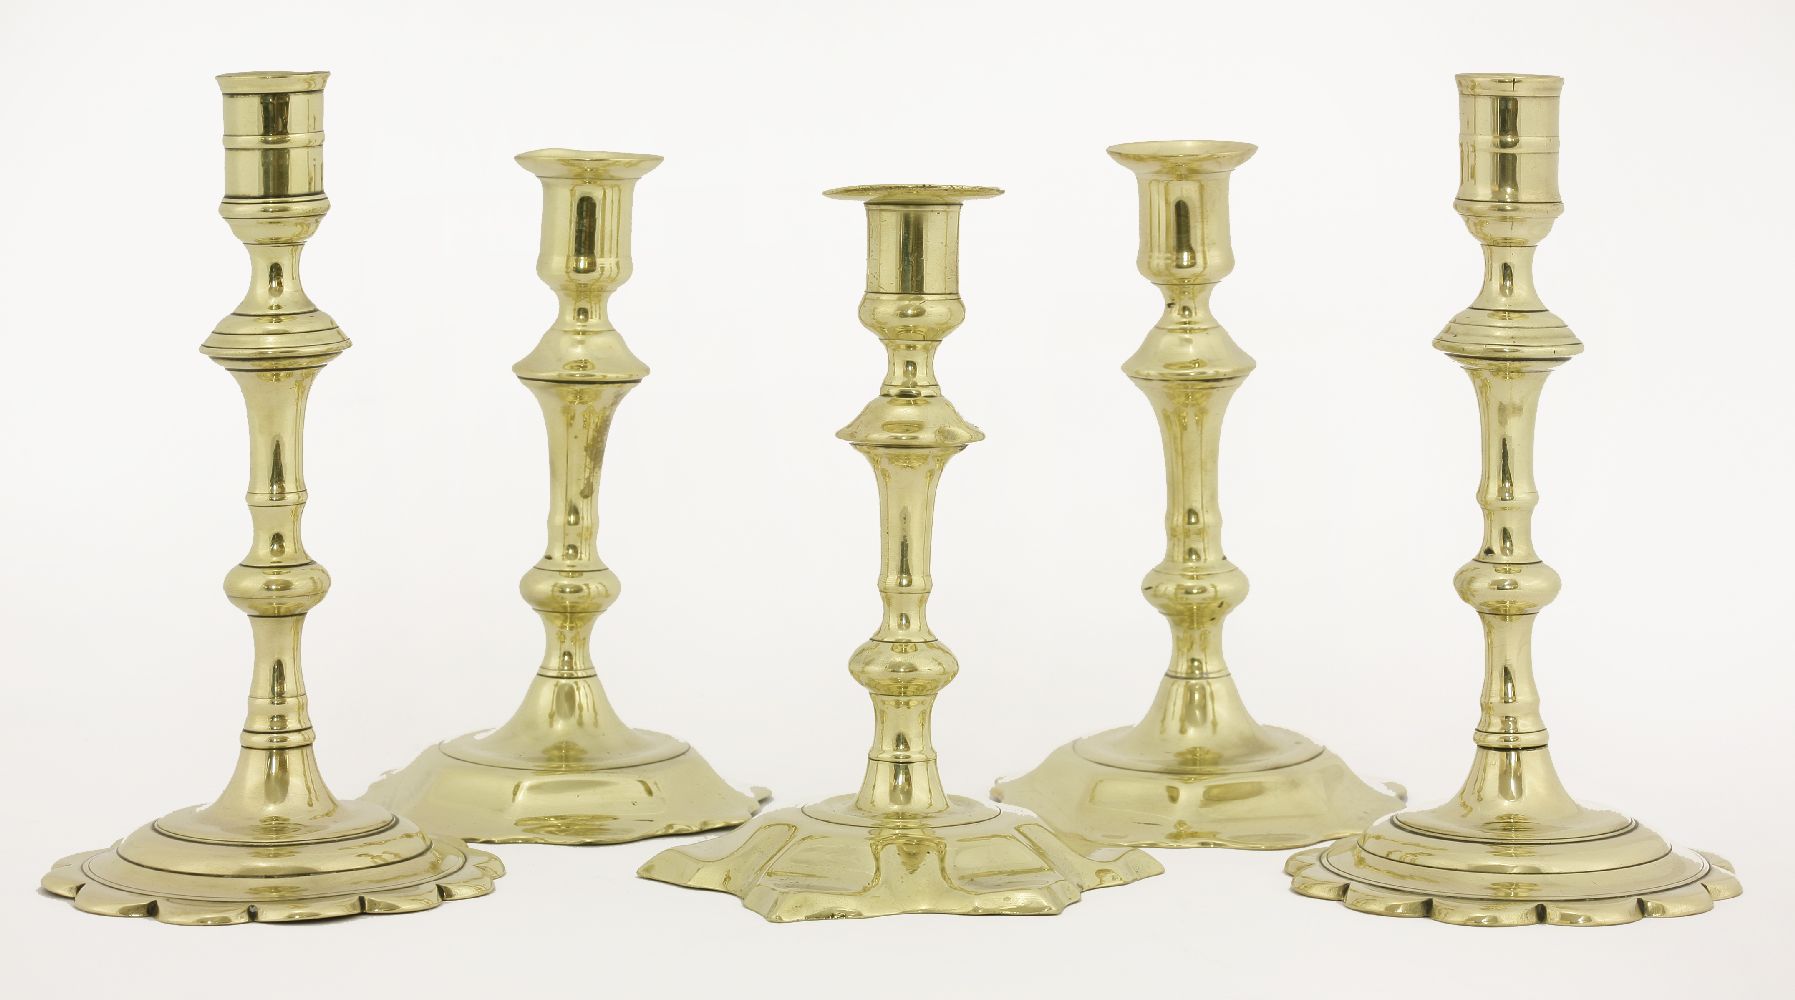 Two pairs of brass candlesticks,mid-18th century, each with petal bases,17 and 19.5cm high,